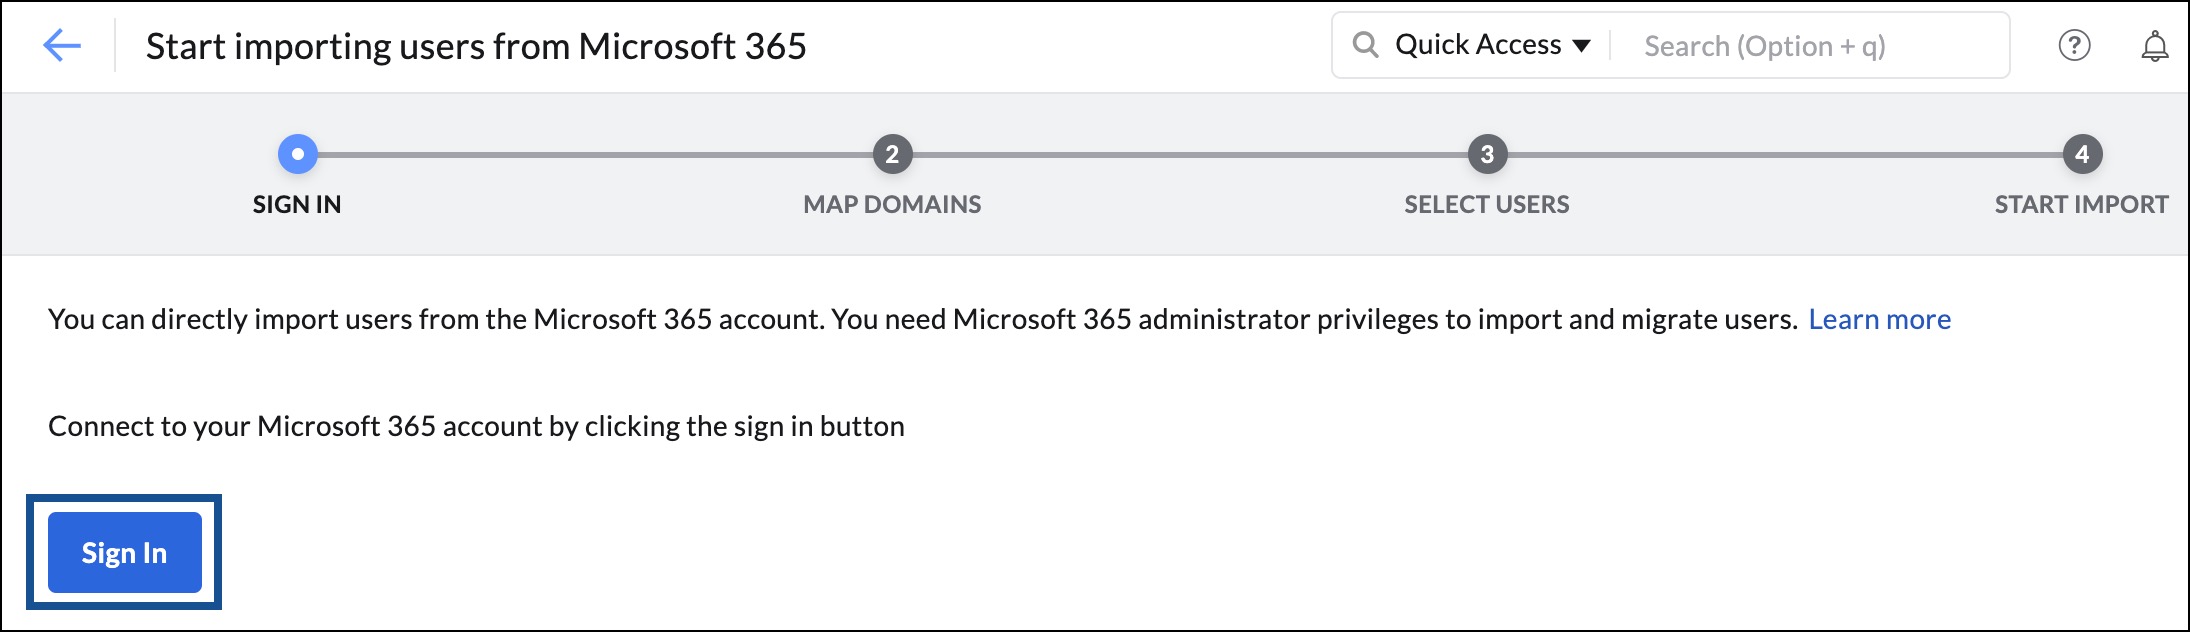 Sign in to Microsoft 365